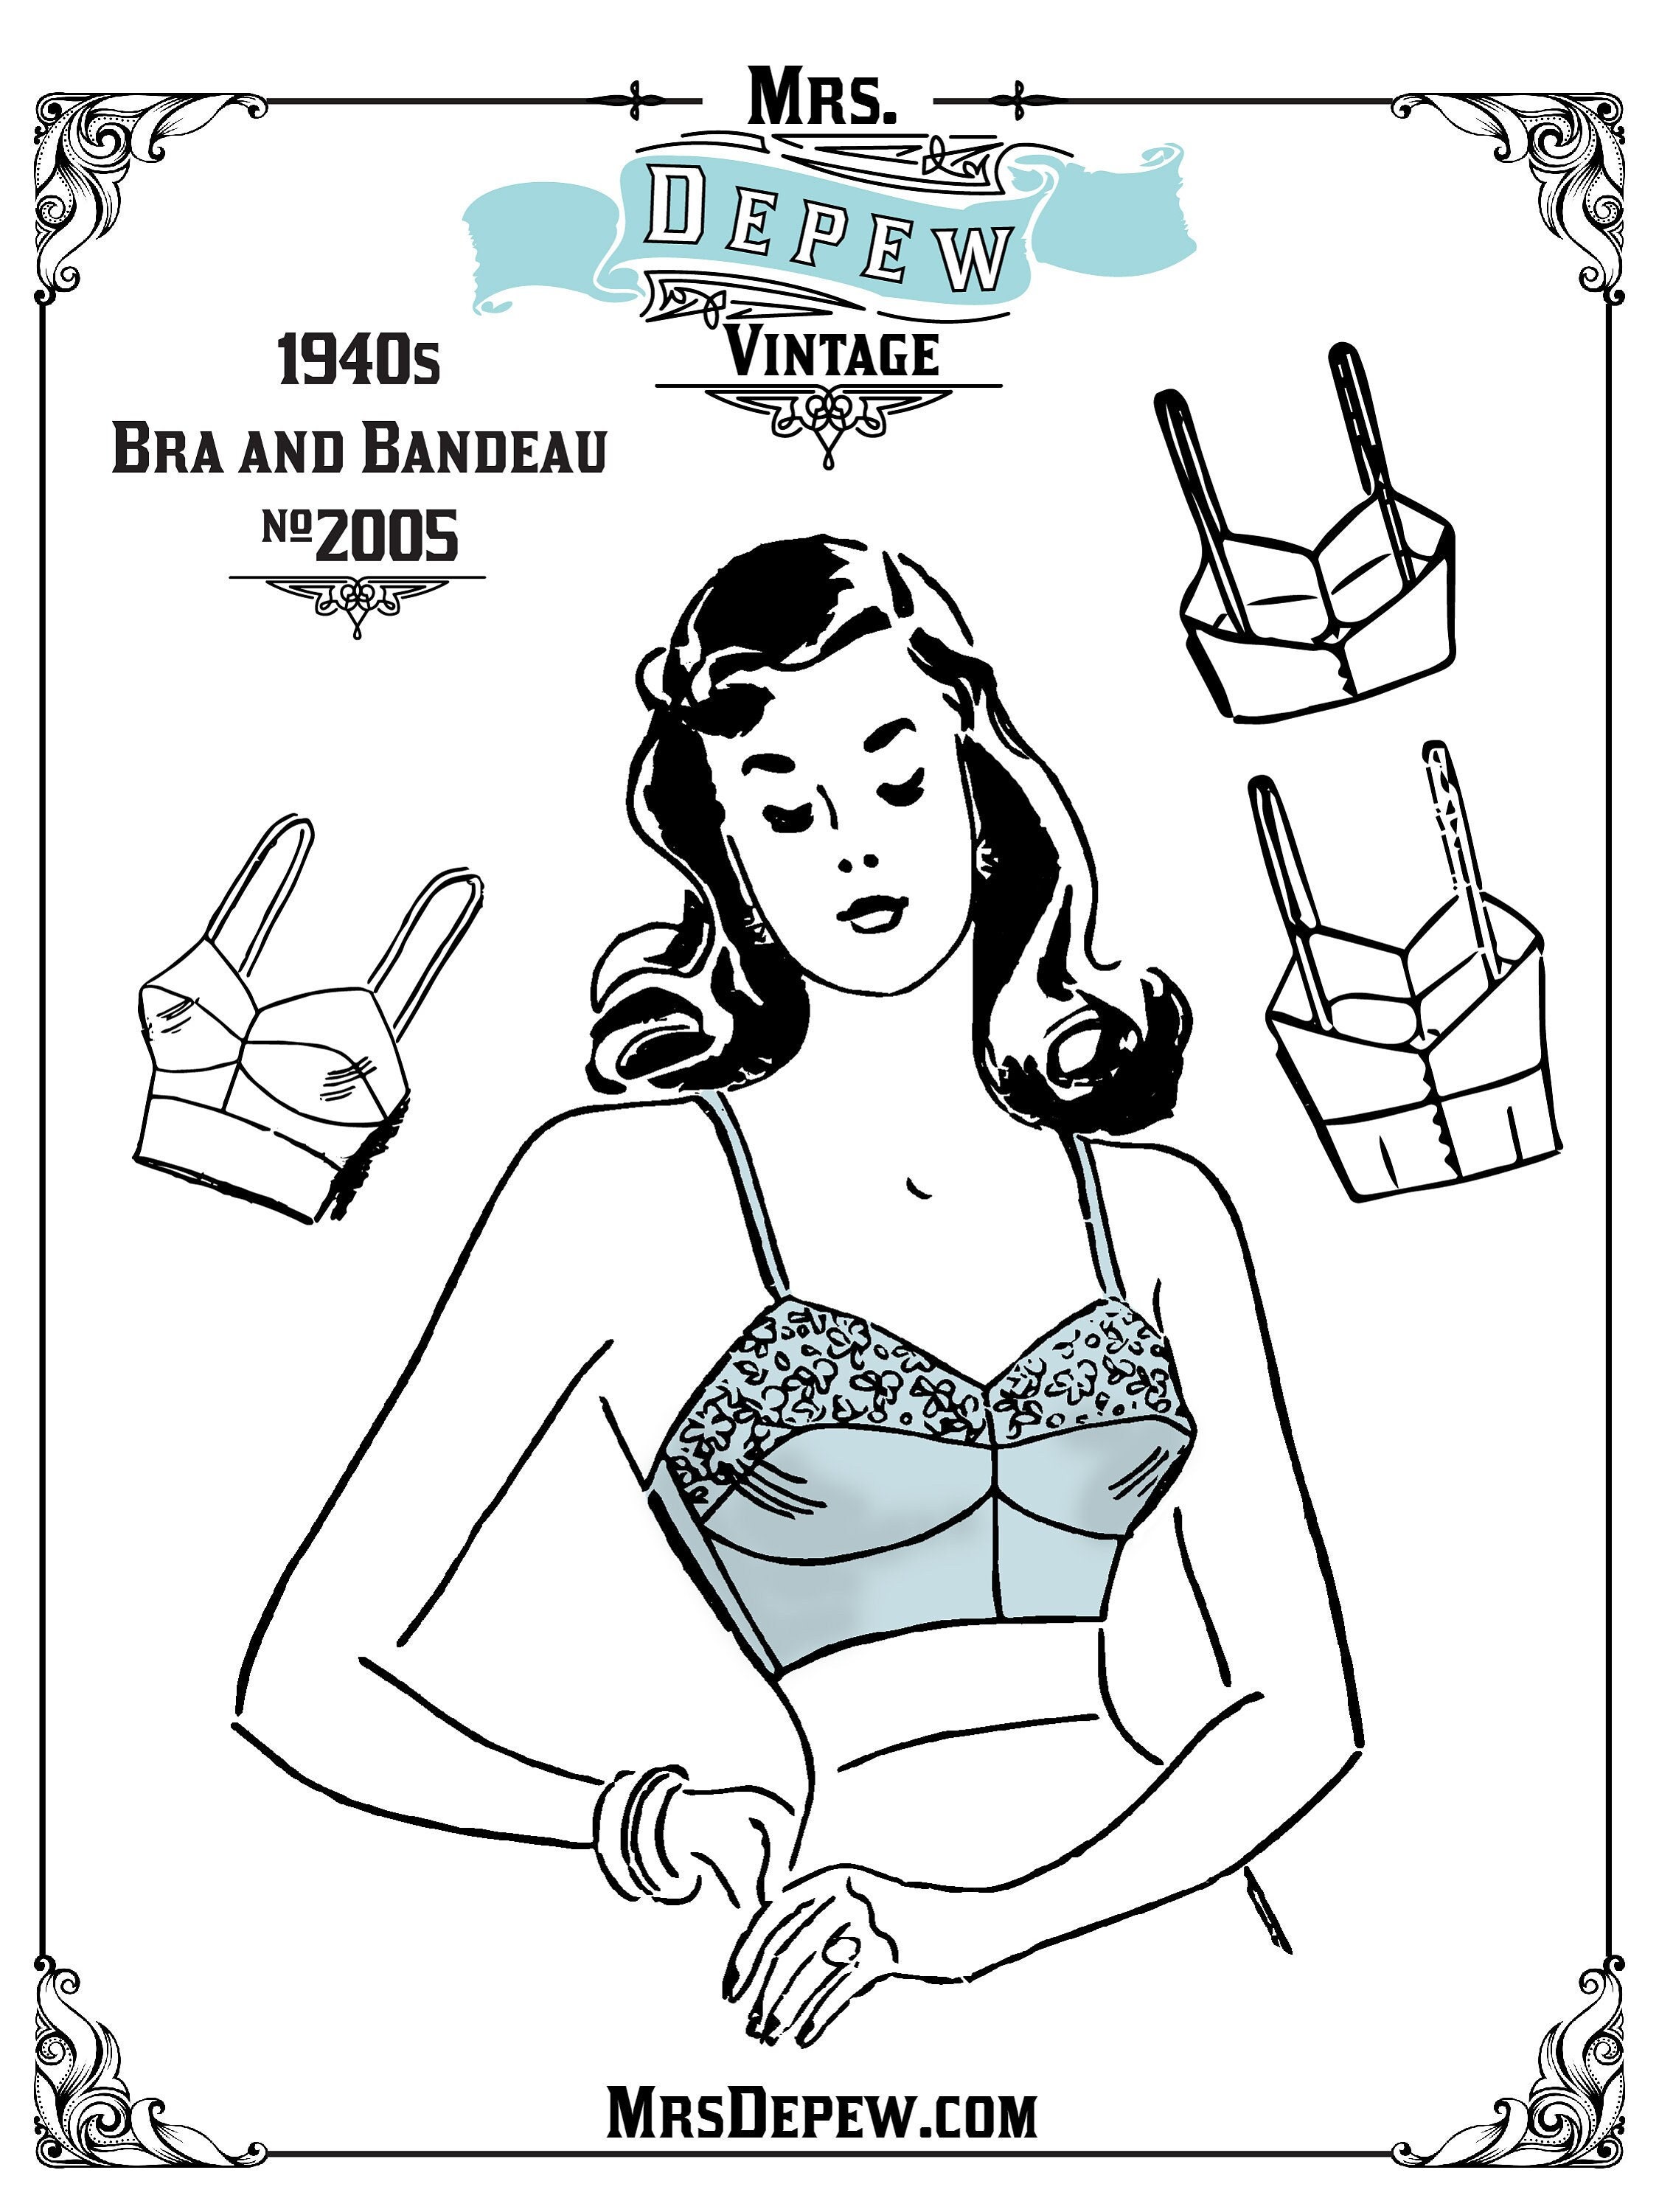 1940s Vintage Lingerie Porn - Buy 1940s Wwii Lingerie Online In India - Etsy India